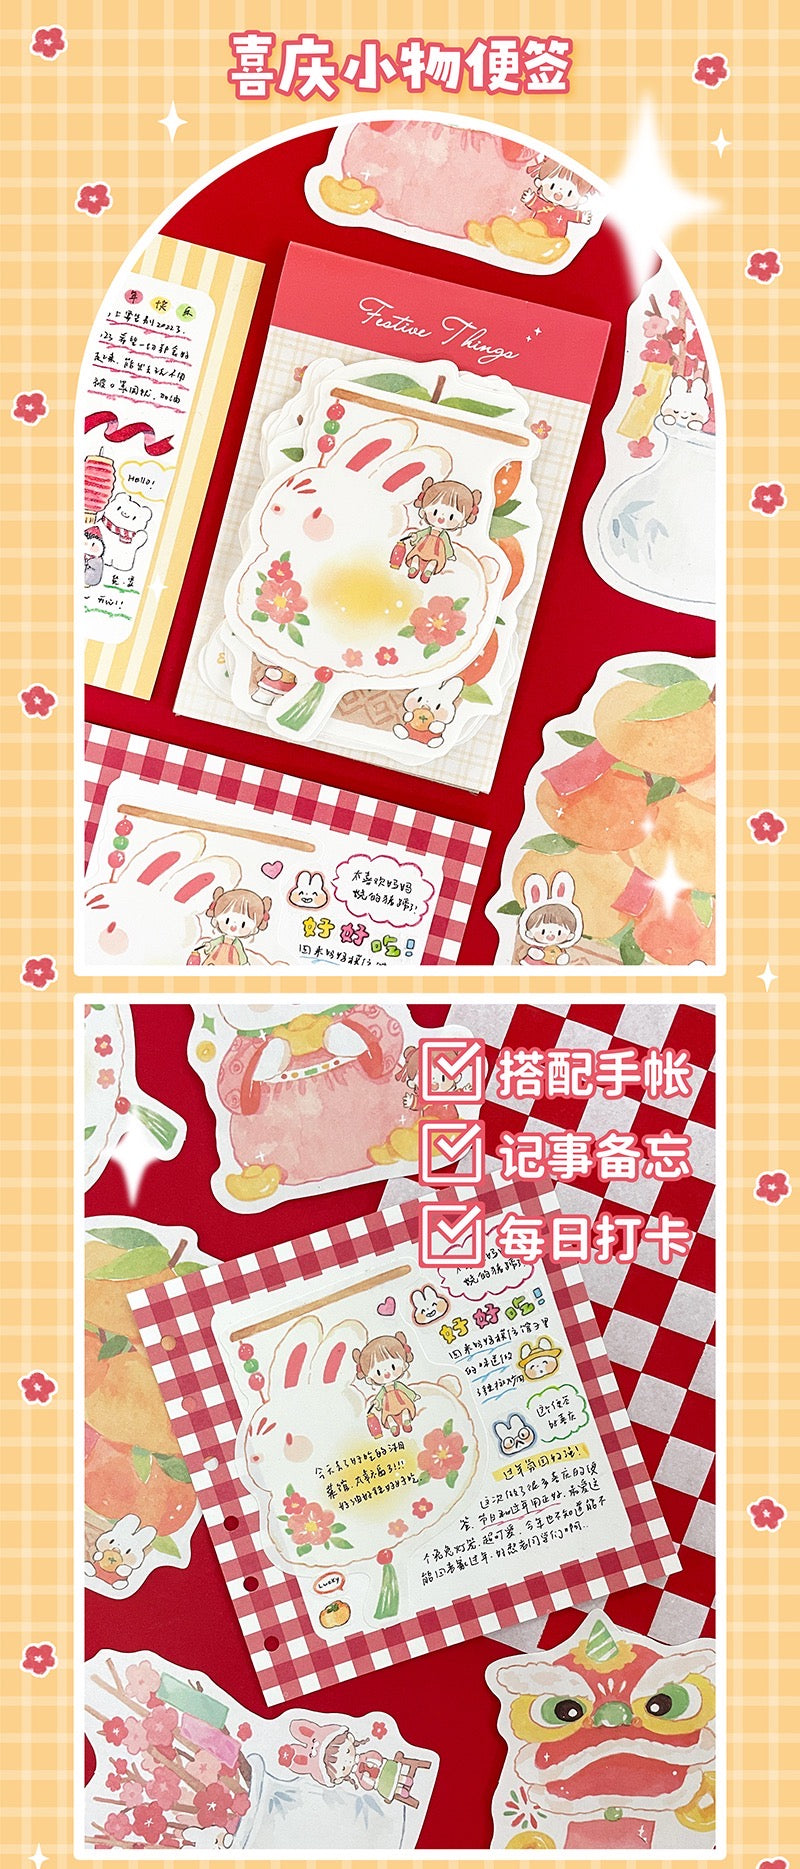 Molinta 「2023 Chinese New Year」series happy holiday festive things memo pack